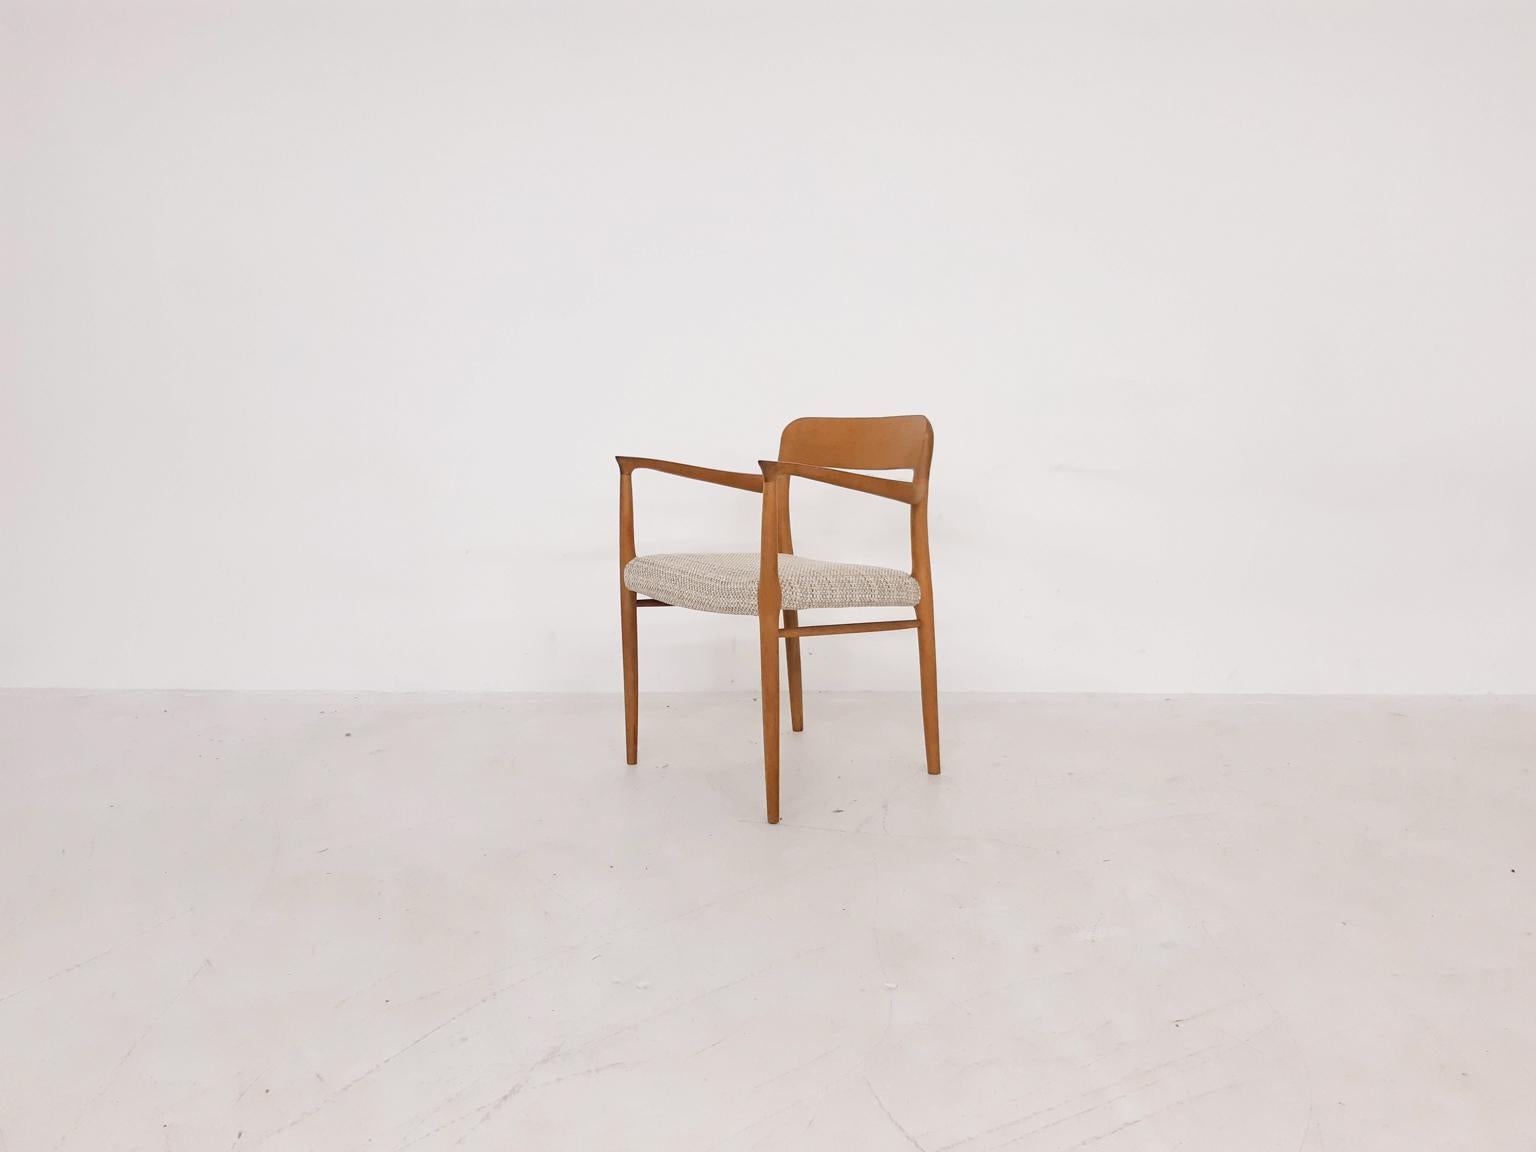 Solid oak dining chair with arm rests by Danish midcentury designer Niels Otto Møller. 

This vintage example from 1959 is Model 56, one of his most popular designs nowadays. The chair is reupholstered in new off-white fabric. In good